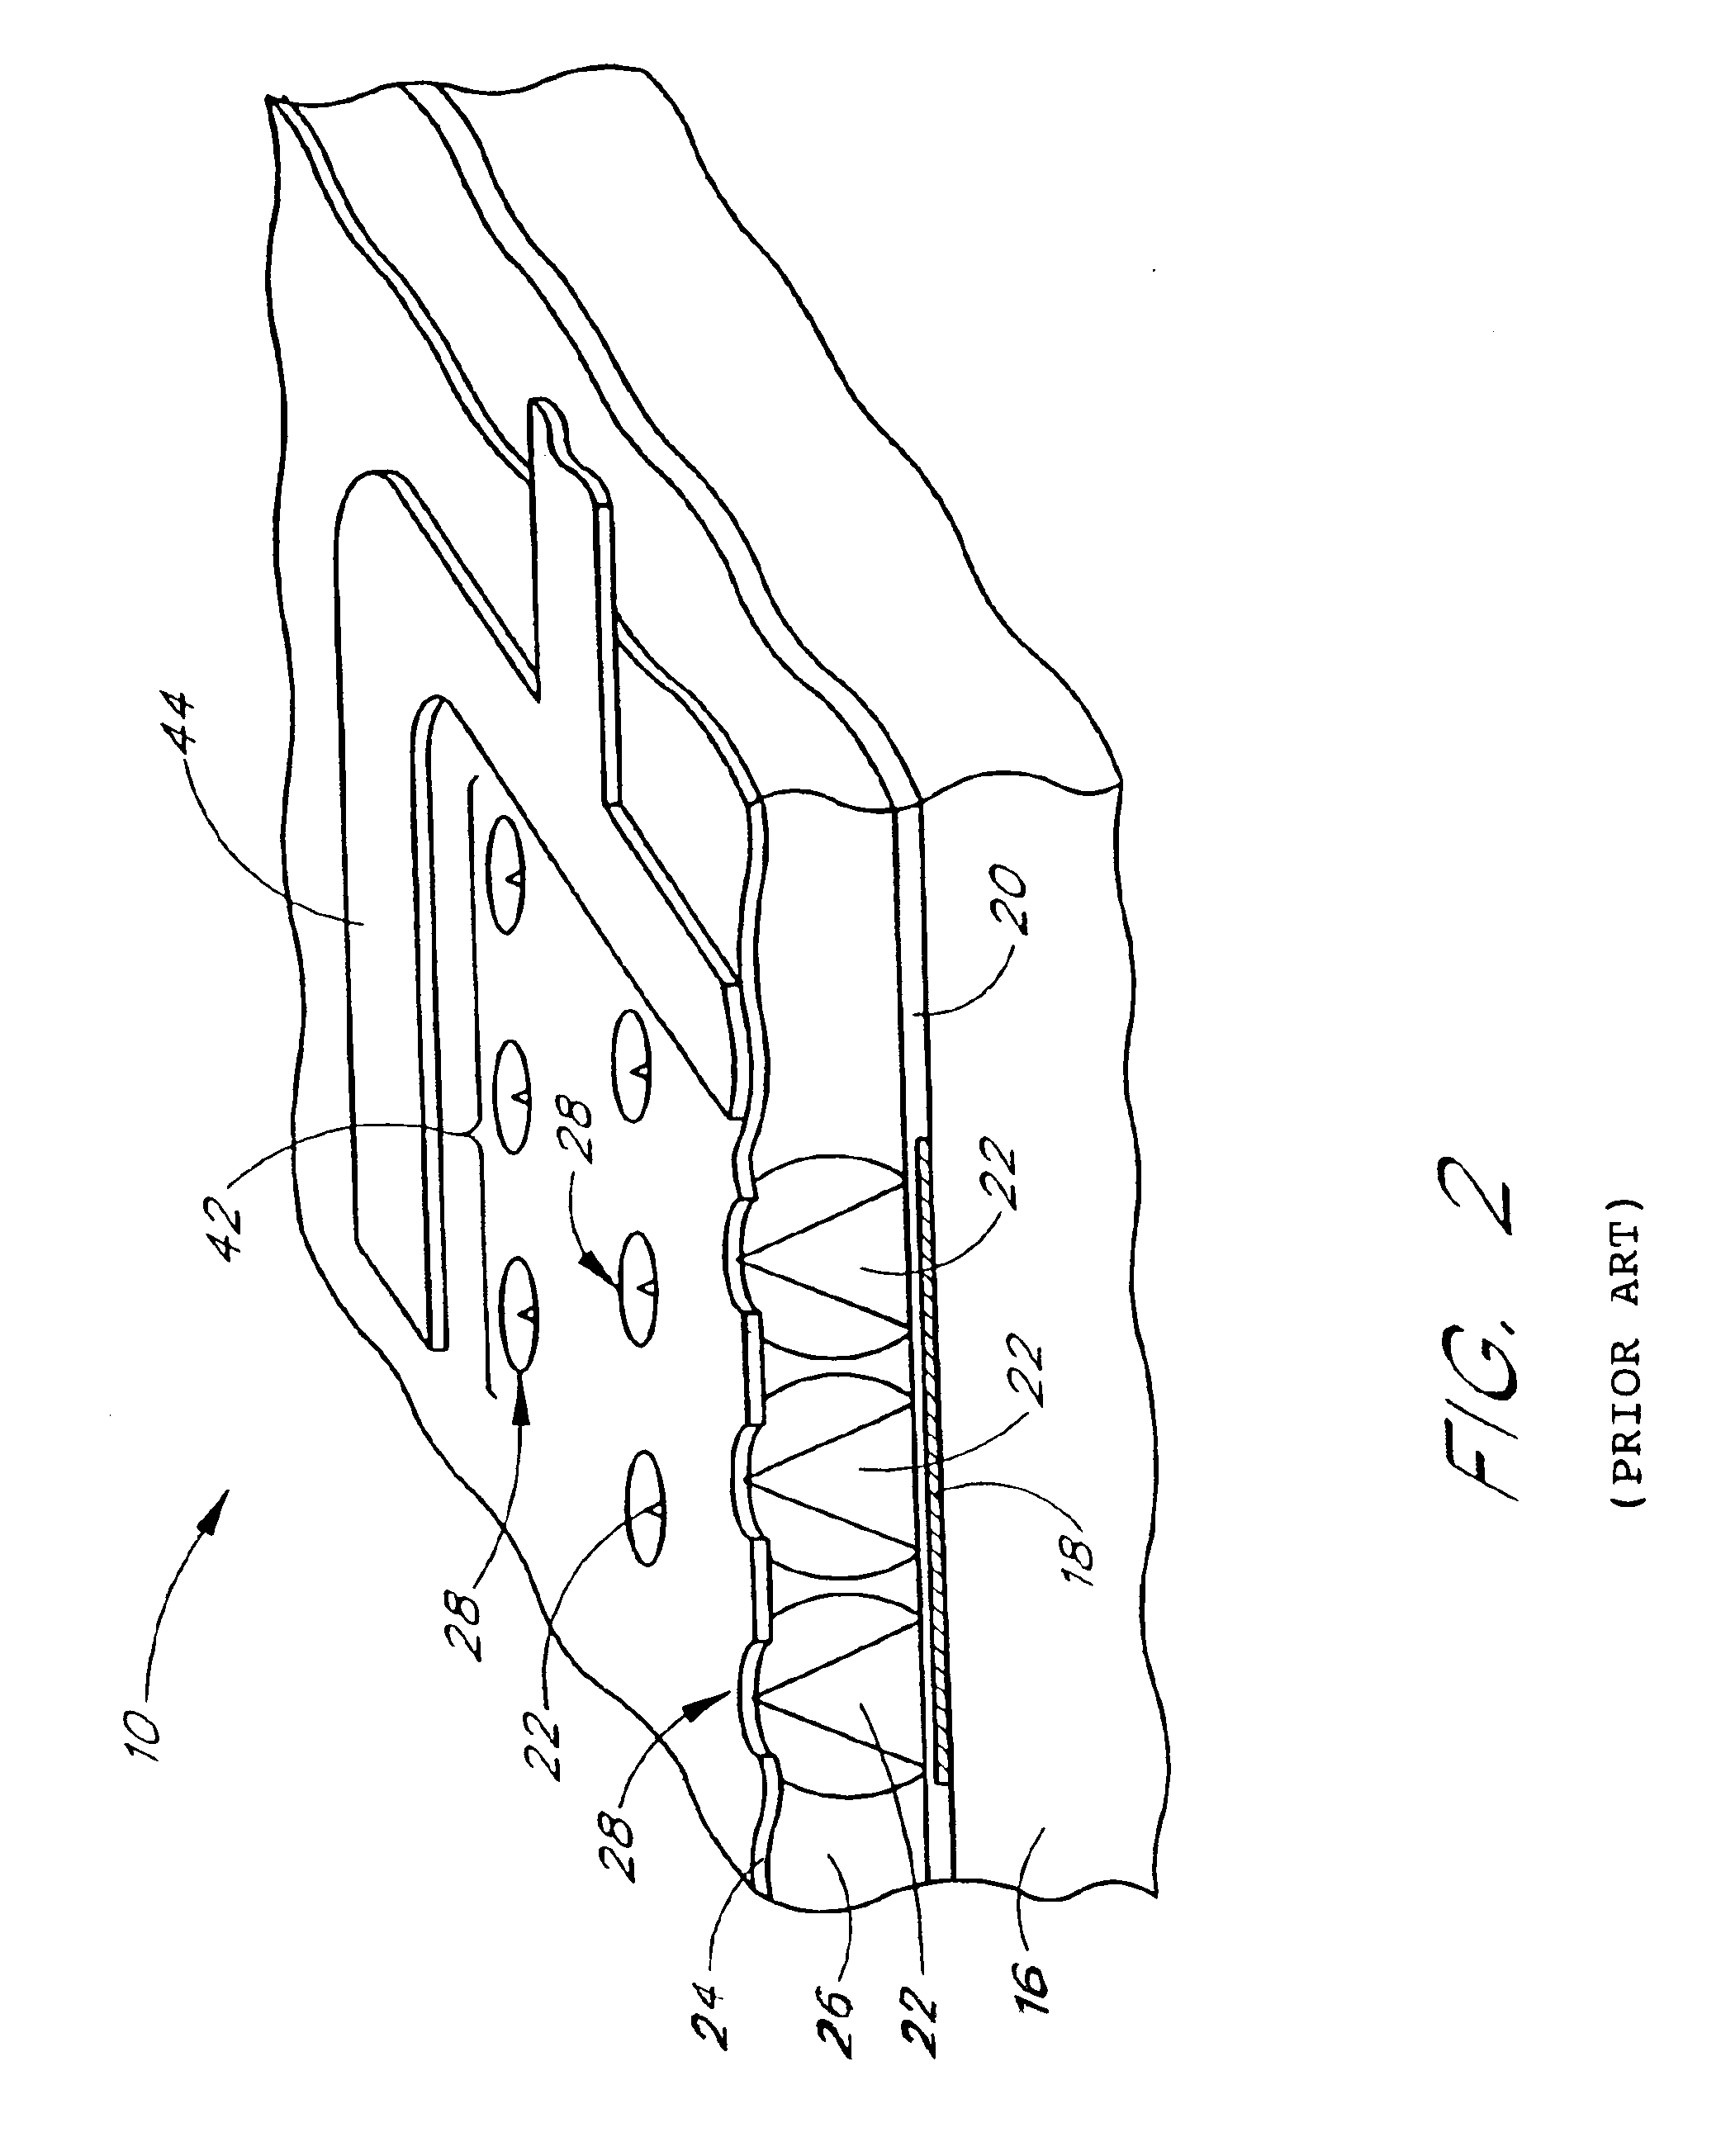 Nitrogen and phosphorus doped amorphous silicon as resistor for field emission display device baseplate